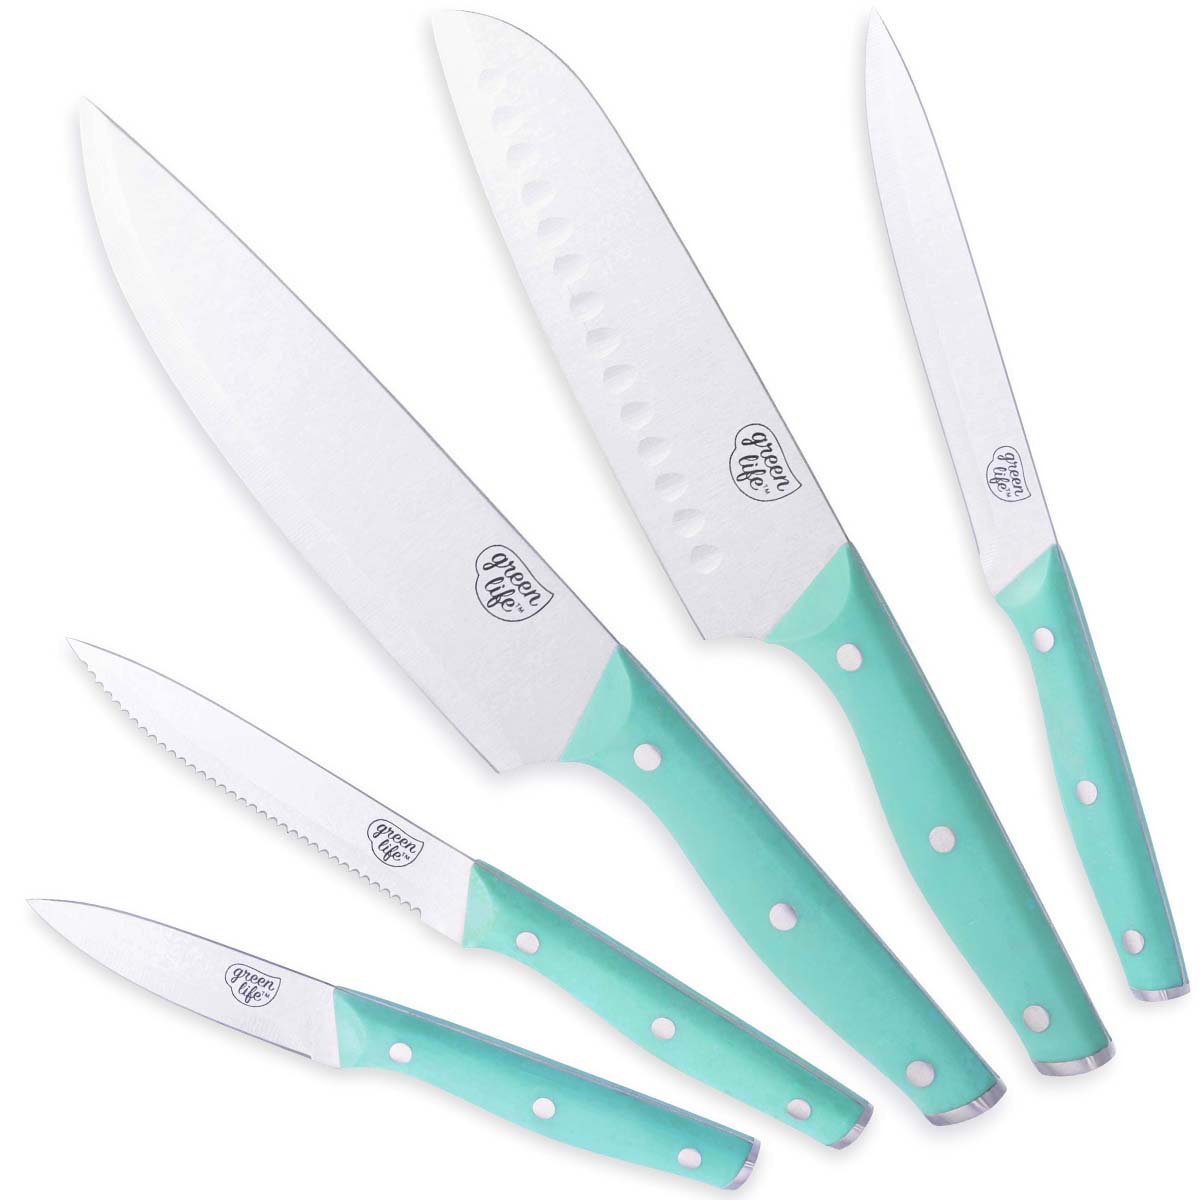  GreenLife High Carbon Stainless Steel 13 Piece Wood Knife Block  Set with Chef Steak Knives and more, Comfort Grip Handles, Triple Rivet  Cutlery, Turquoise: Home & Kitchen